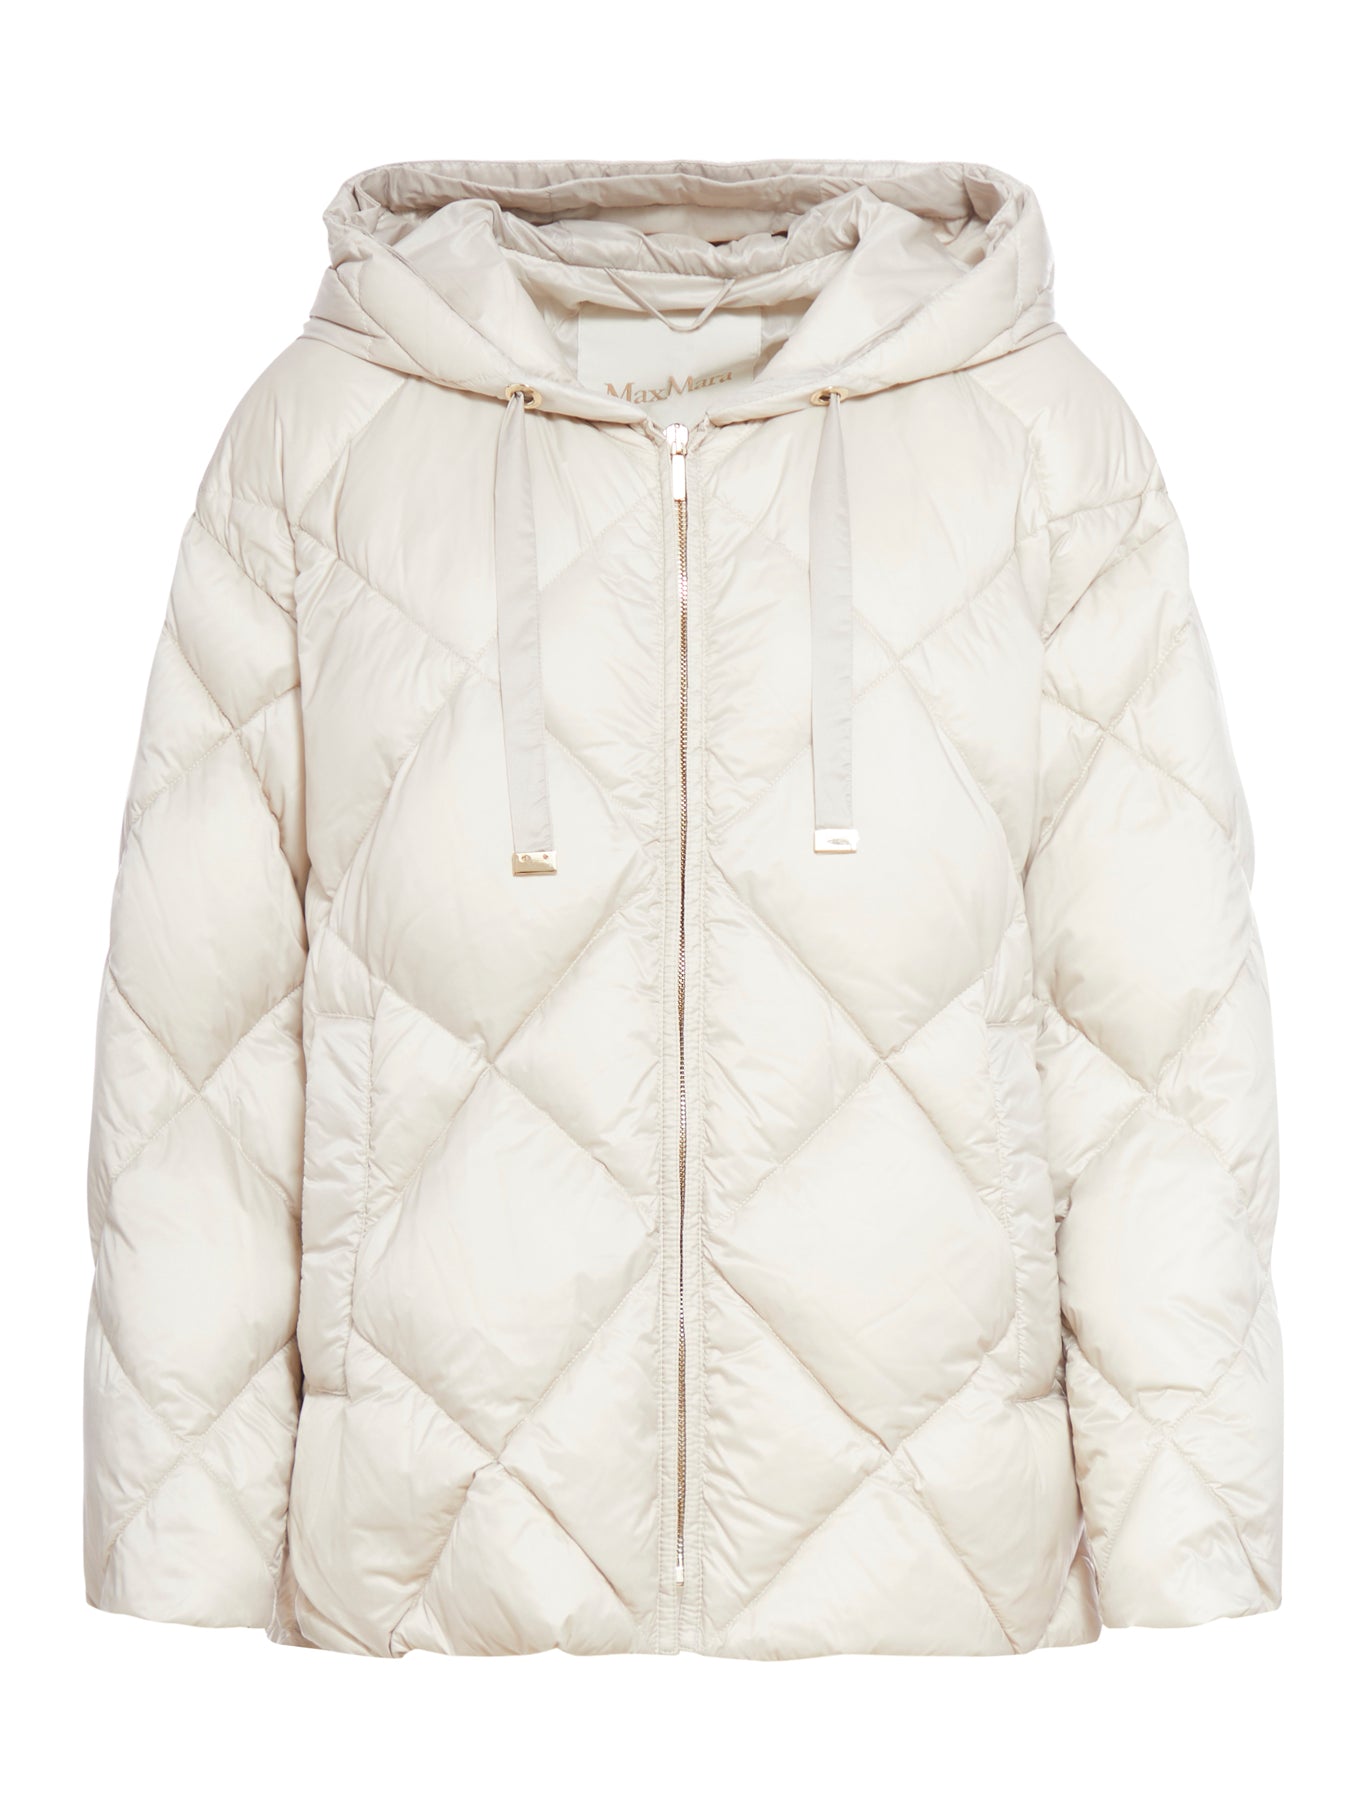 Max Mara The Cube Tremme Padded Jkt In Nude & Neutrals | ModeSens